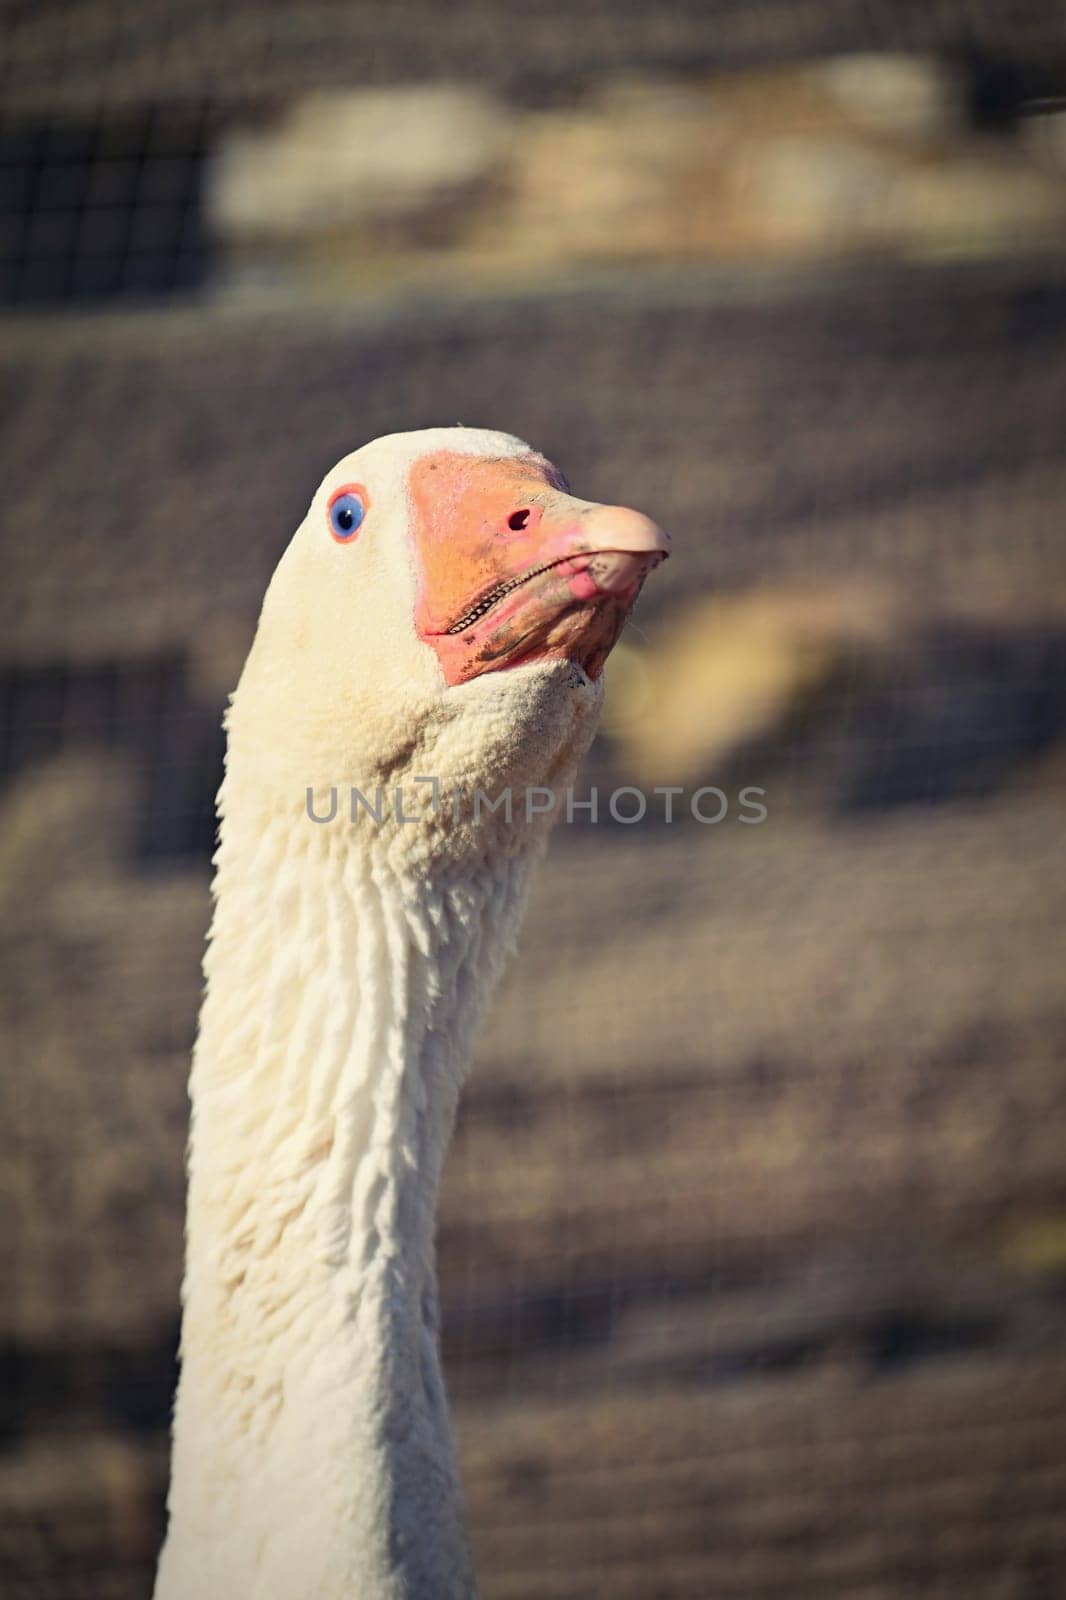 Domestic goose. Funny portrait of an animal on a farm. by Montypeter